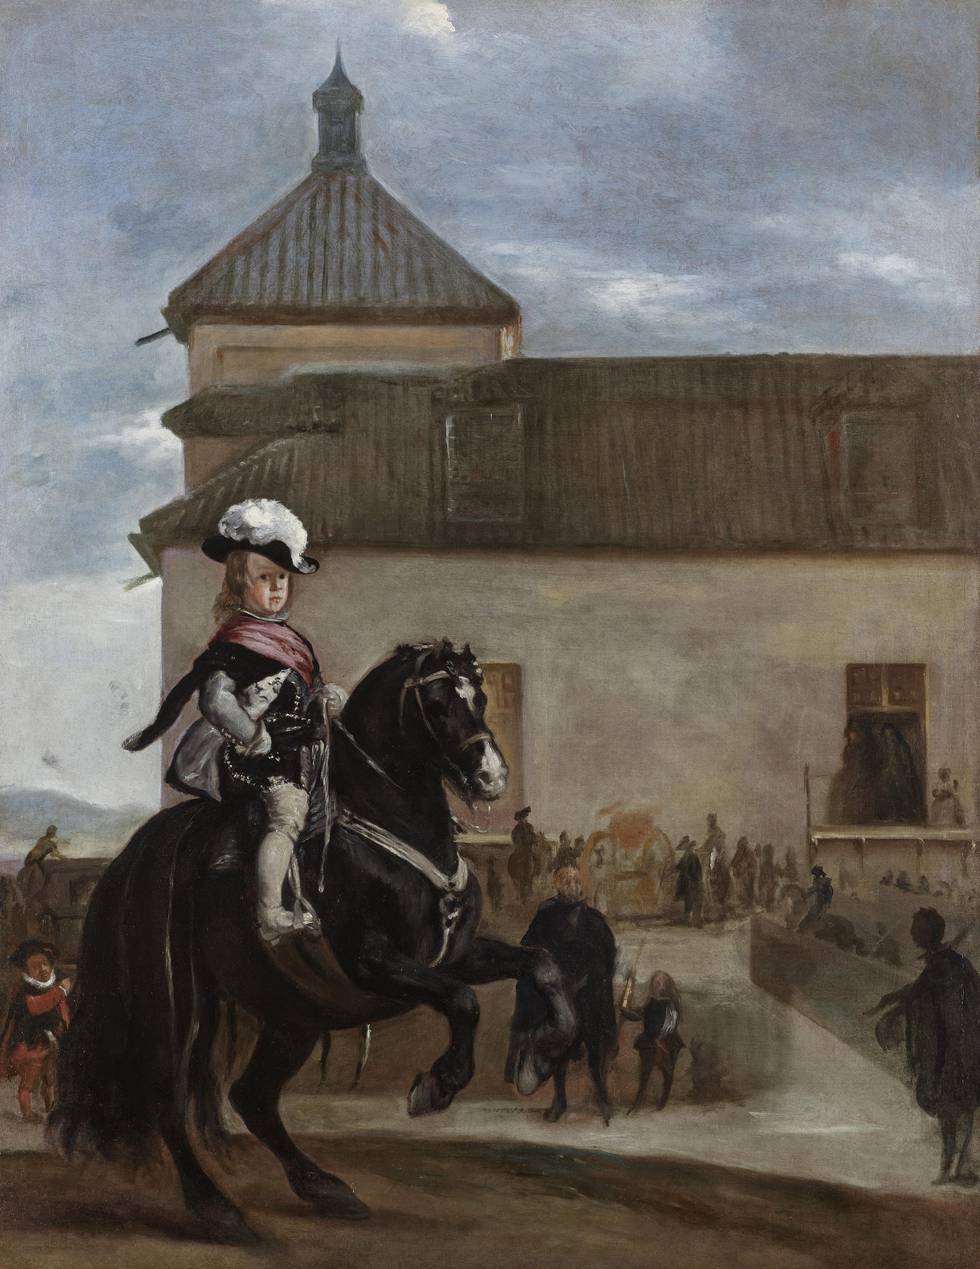 A painting of a young boy riding a horse outside a building